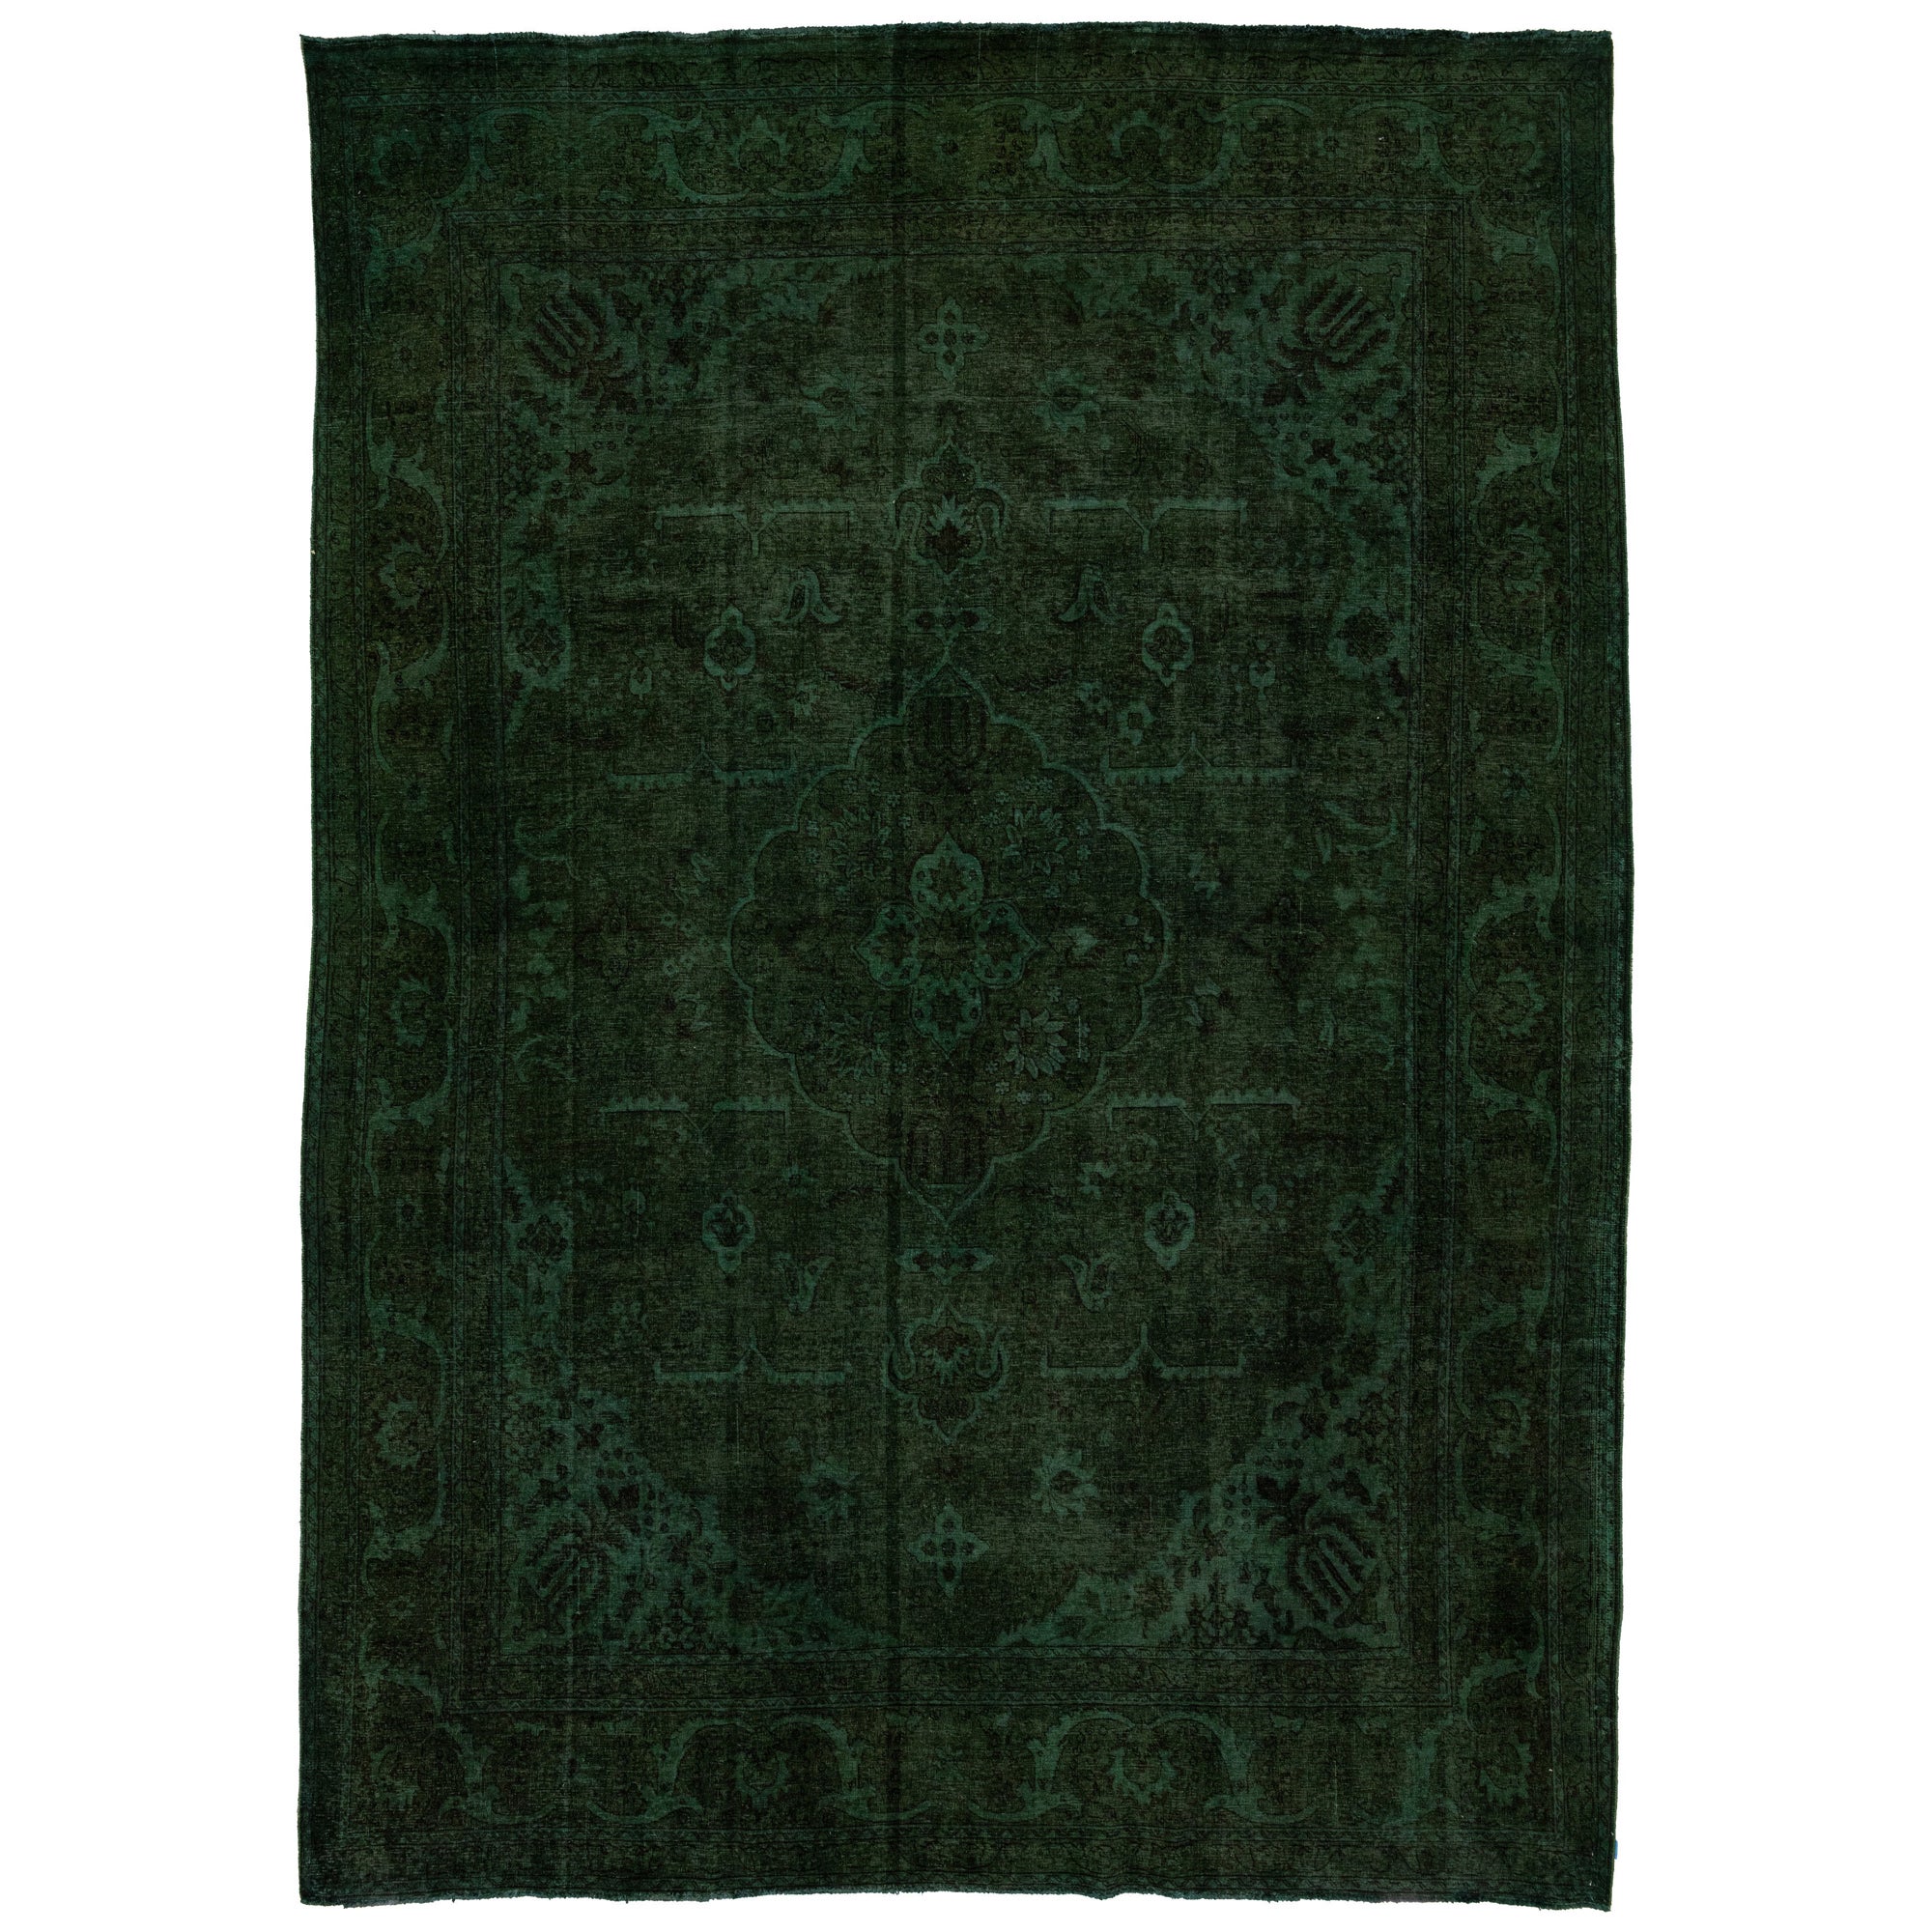 11 x 16 Antique Overdyed Persian Wool Rug With Medallion Design In Green For Sale